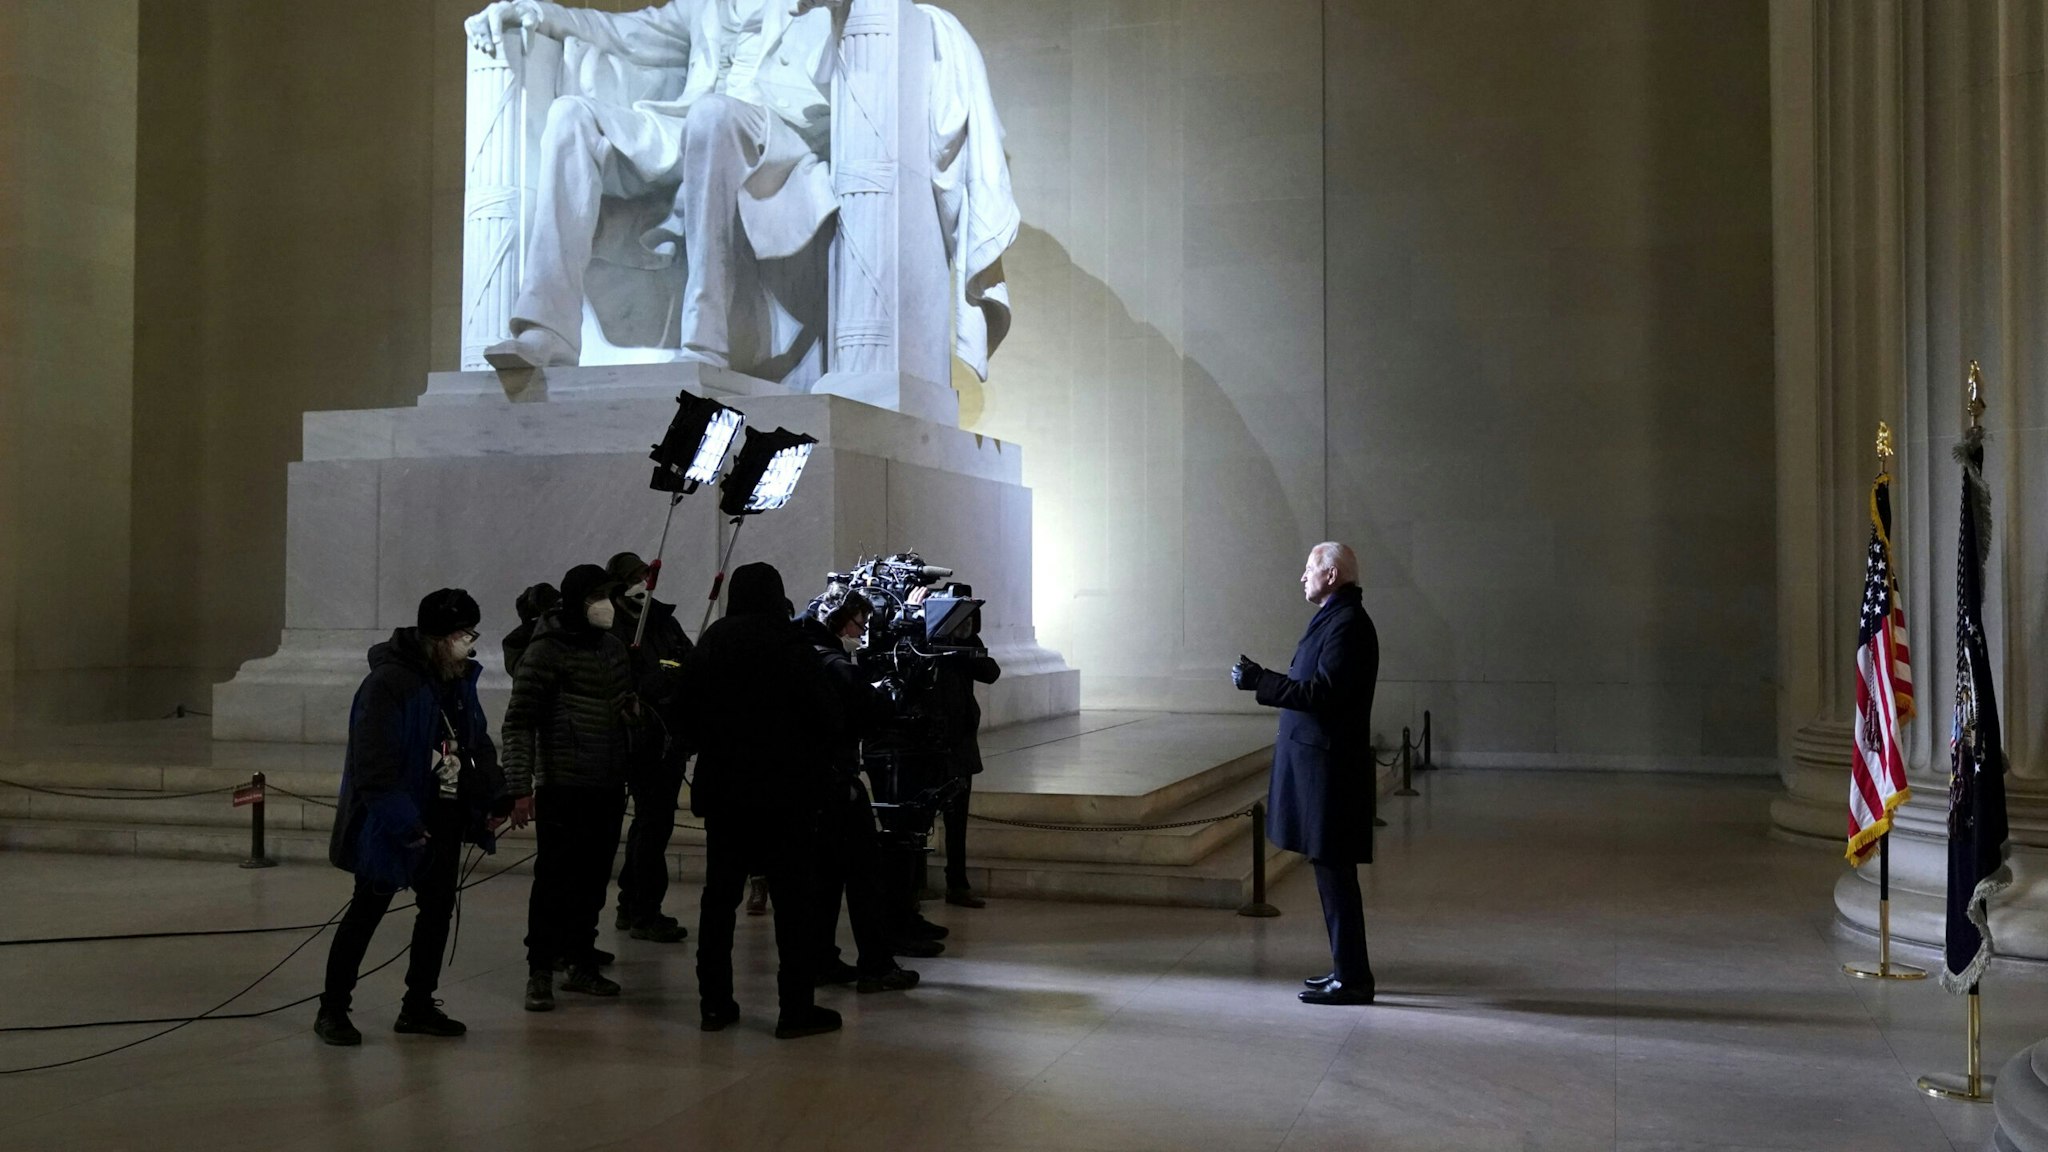 US President Joe Biden speaks during the "Celebrating America" inaugural program at the Lincoln Memorial in Washington, DC, on January 20, 2021, after being sworn in at the US Capitol earlier in the day.